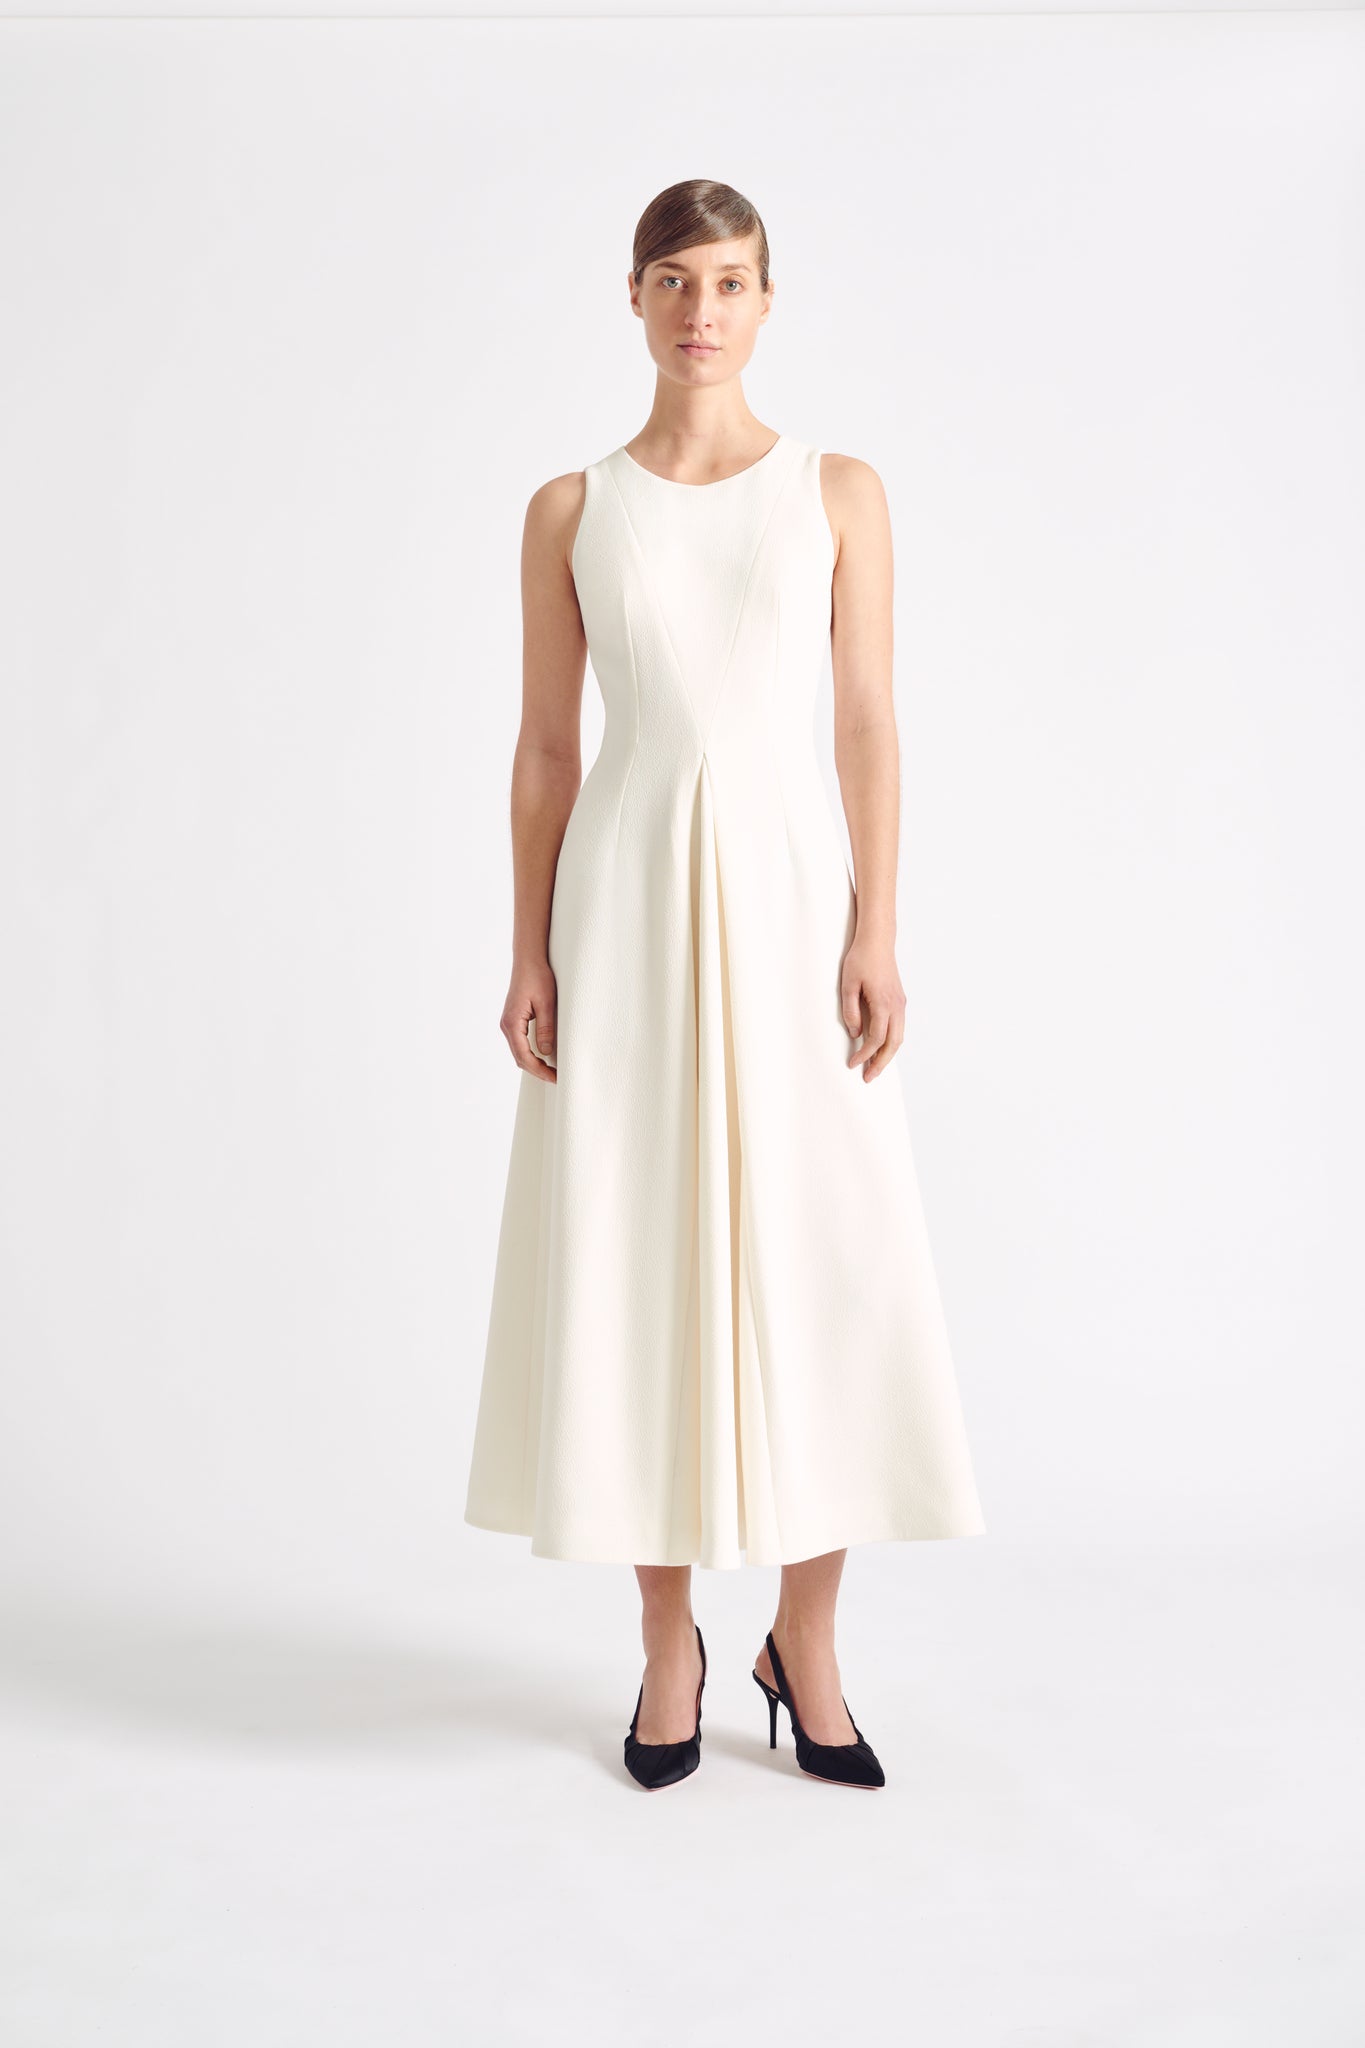 Milly Dress | Ivory Fit and Flare Midi Dress in Double Crepe | Emilia ...